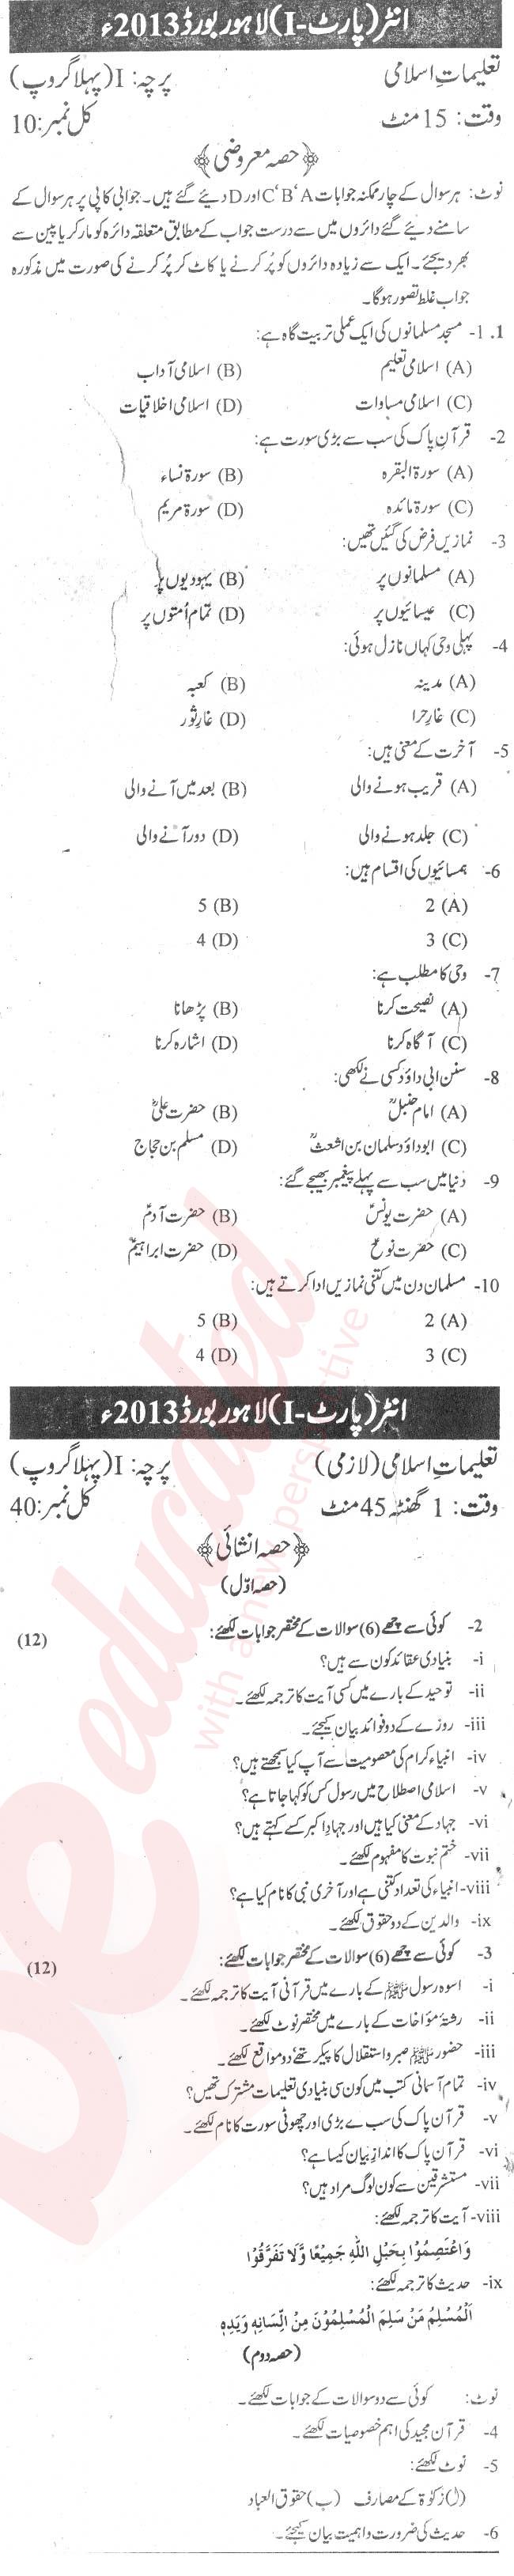 Islamic Studies 11th class Past Paper Group 1 BISE Lahore 2013